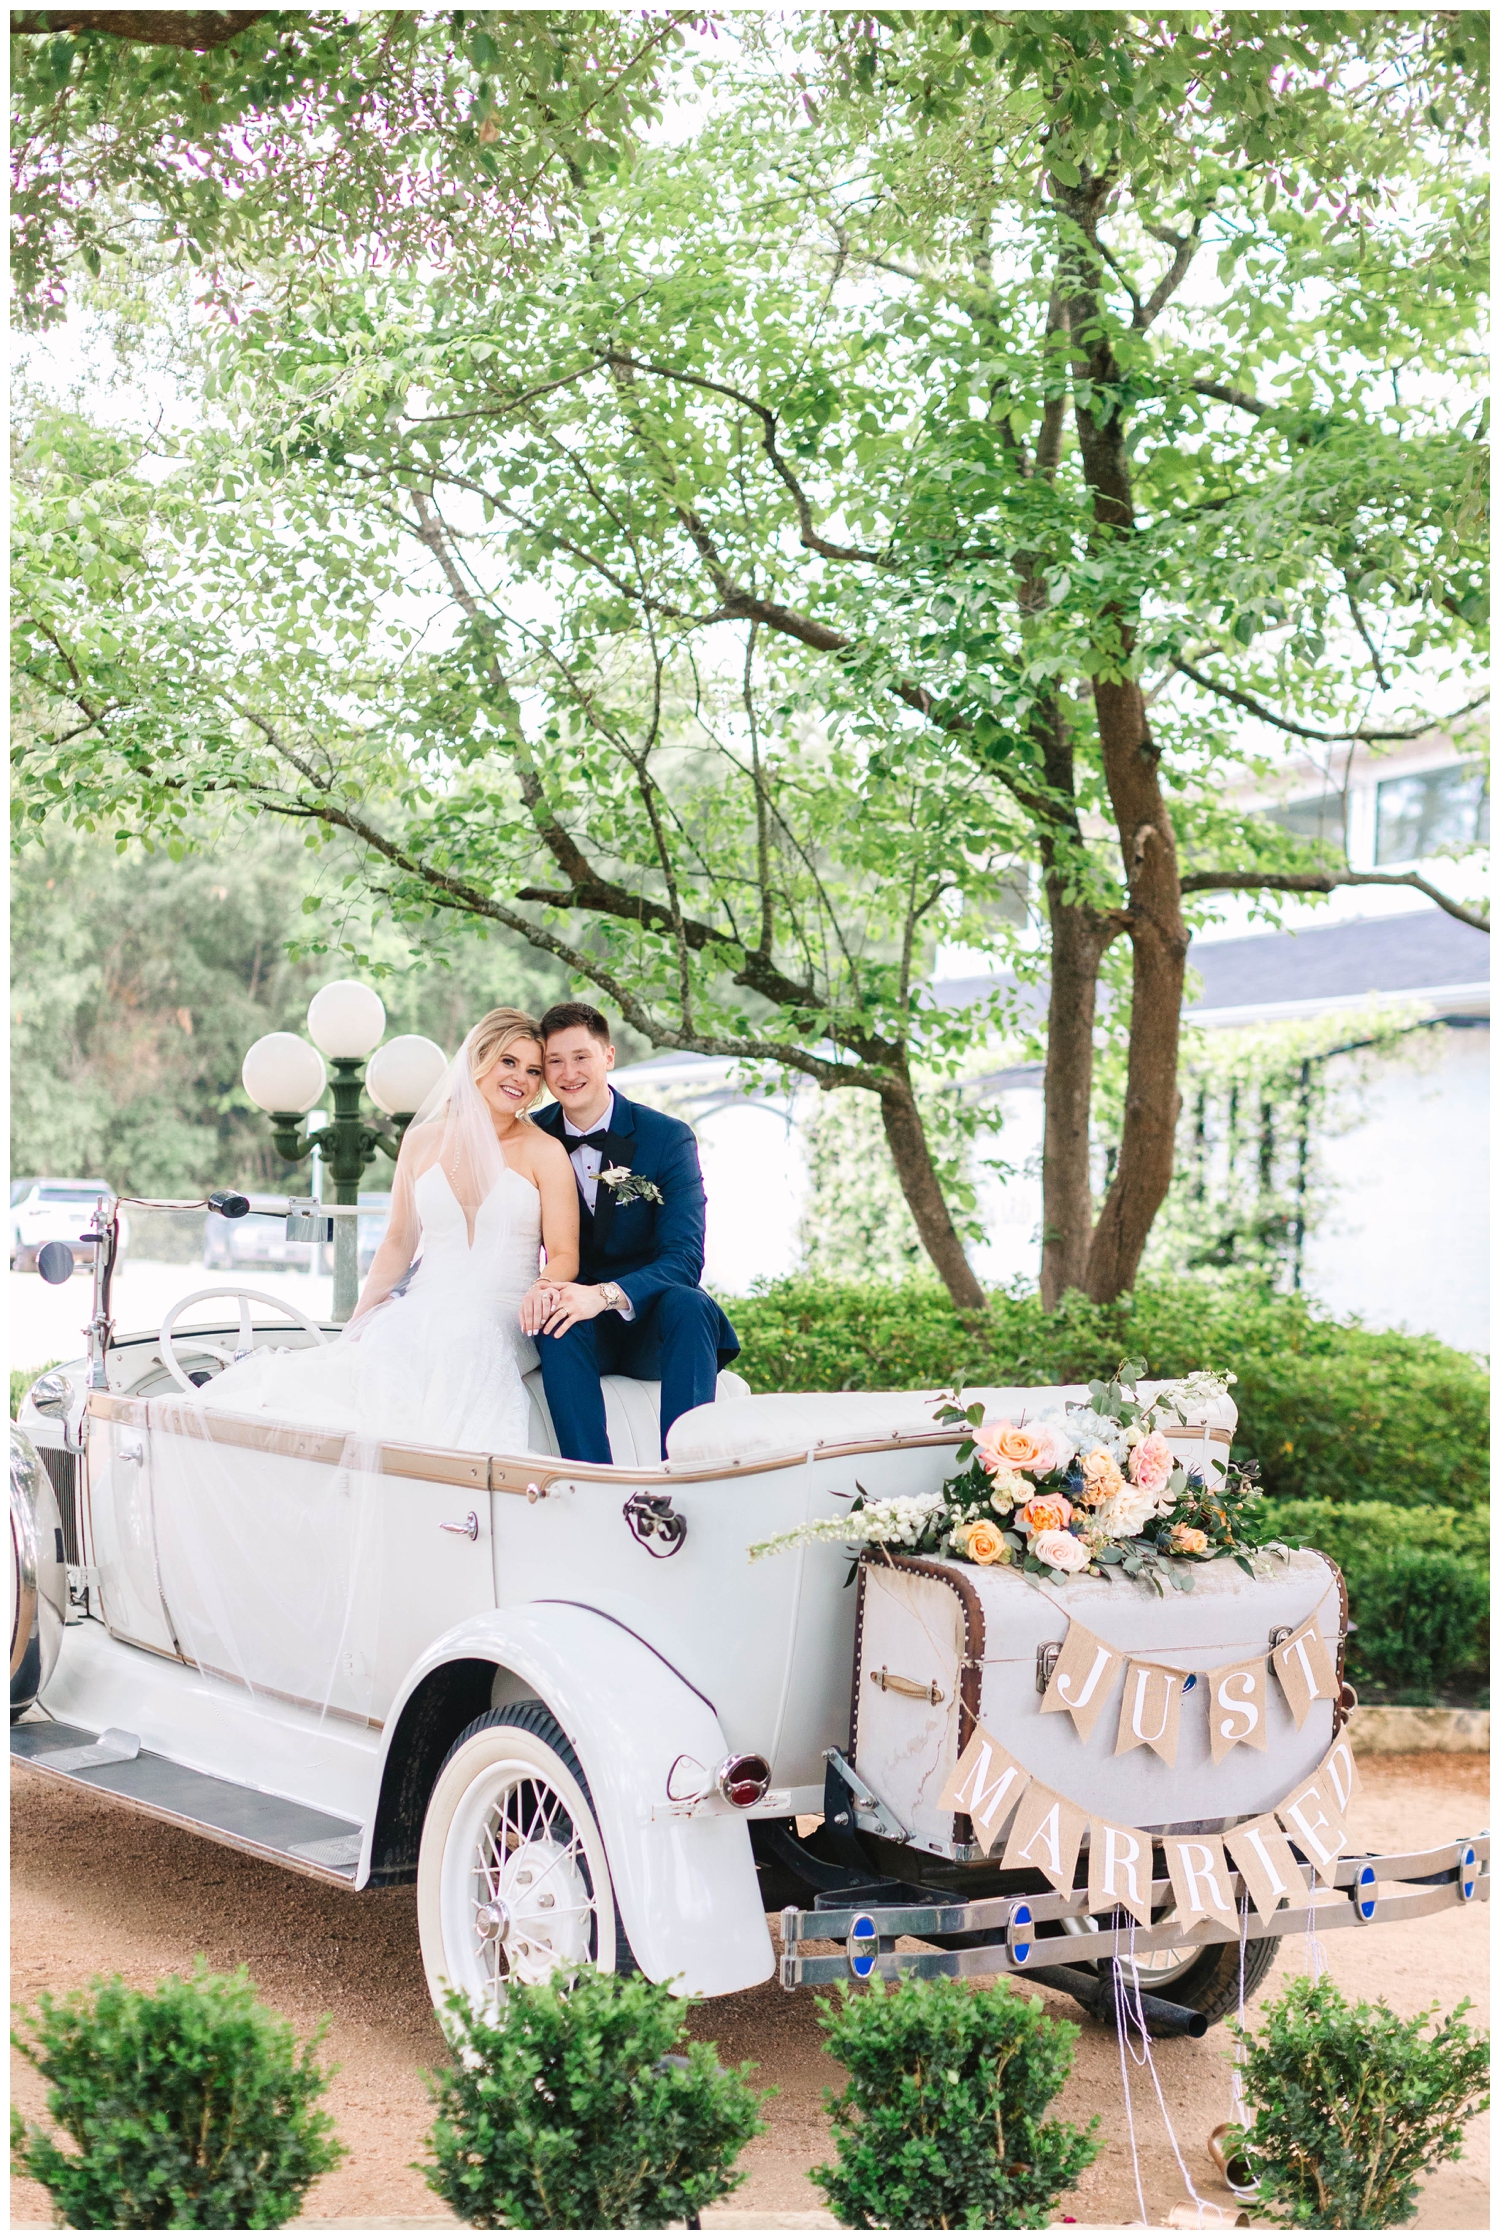 bride and groom in vintage get away car with just married sign at The Peach Orchard Beloved Ballroom Reception Talk about a reception fit for a princess! The Peach Grand Ballroom was stunning! Decor by Dulce paired the perfect toile napkins with white and gold chargers, dusty blue linens, smoke colored glasses, and gold flatware. Cakes by Paula created a beautiful four tiered cake with pearl detail that looked gorgeous nestled in flowers beneath one of the stunning chandeliers inside The Peach Orchard's Beloved Ballroom. Christen and John brought in other details that reflected who they are as a couple. They set up a legacy display on a beautiful antique chest with old wedding photos of the generations that came before them on both sides. They wanted to remember the family that came before them and who helped them get to where they are today especially, if they couldn't be there with them on their special day. After the toasts were made and dinner was served, guests danced the night away! Before leaving their reception, the couple shared a private last dance. It was just the two of them in the ballroom listening to a song that was really meaningful and emotional. Christen shared, “ It was probably the first moment that we took a breath and went "Oh wow, we're married!" Christen and John exited the reception through streamers with all their family and friends cheering them on. The Peach Orchard’s 1920s vintage car named Henry drove them away as they started their new life together.